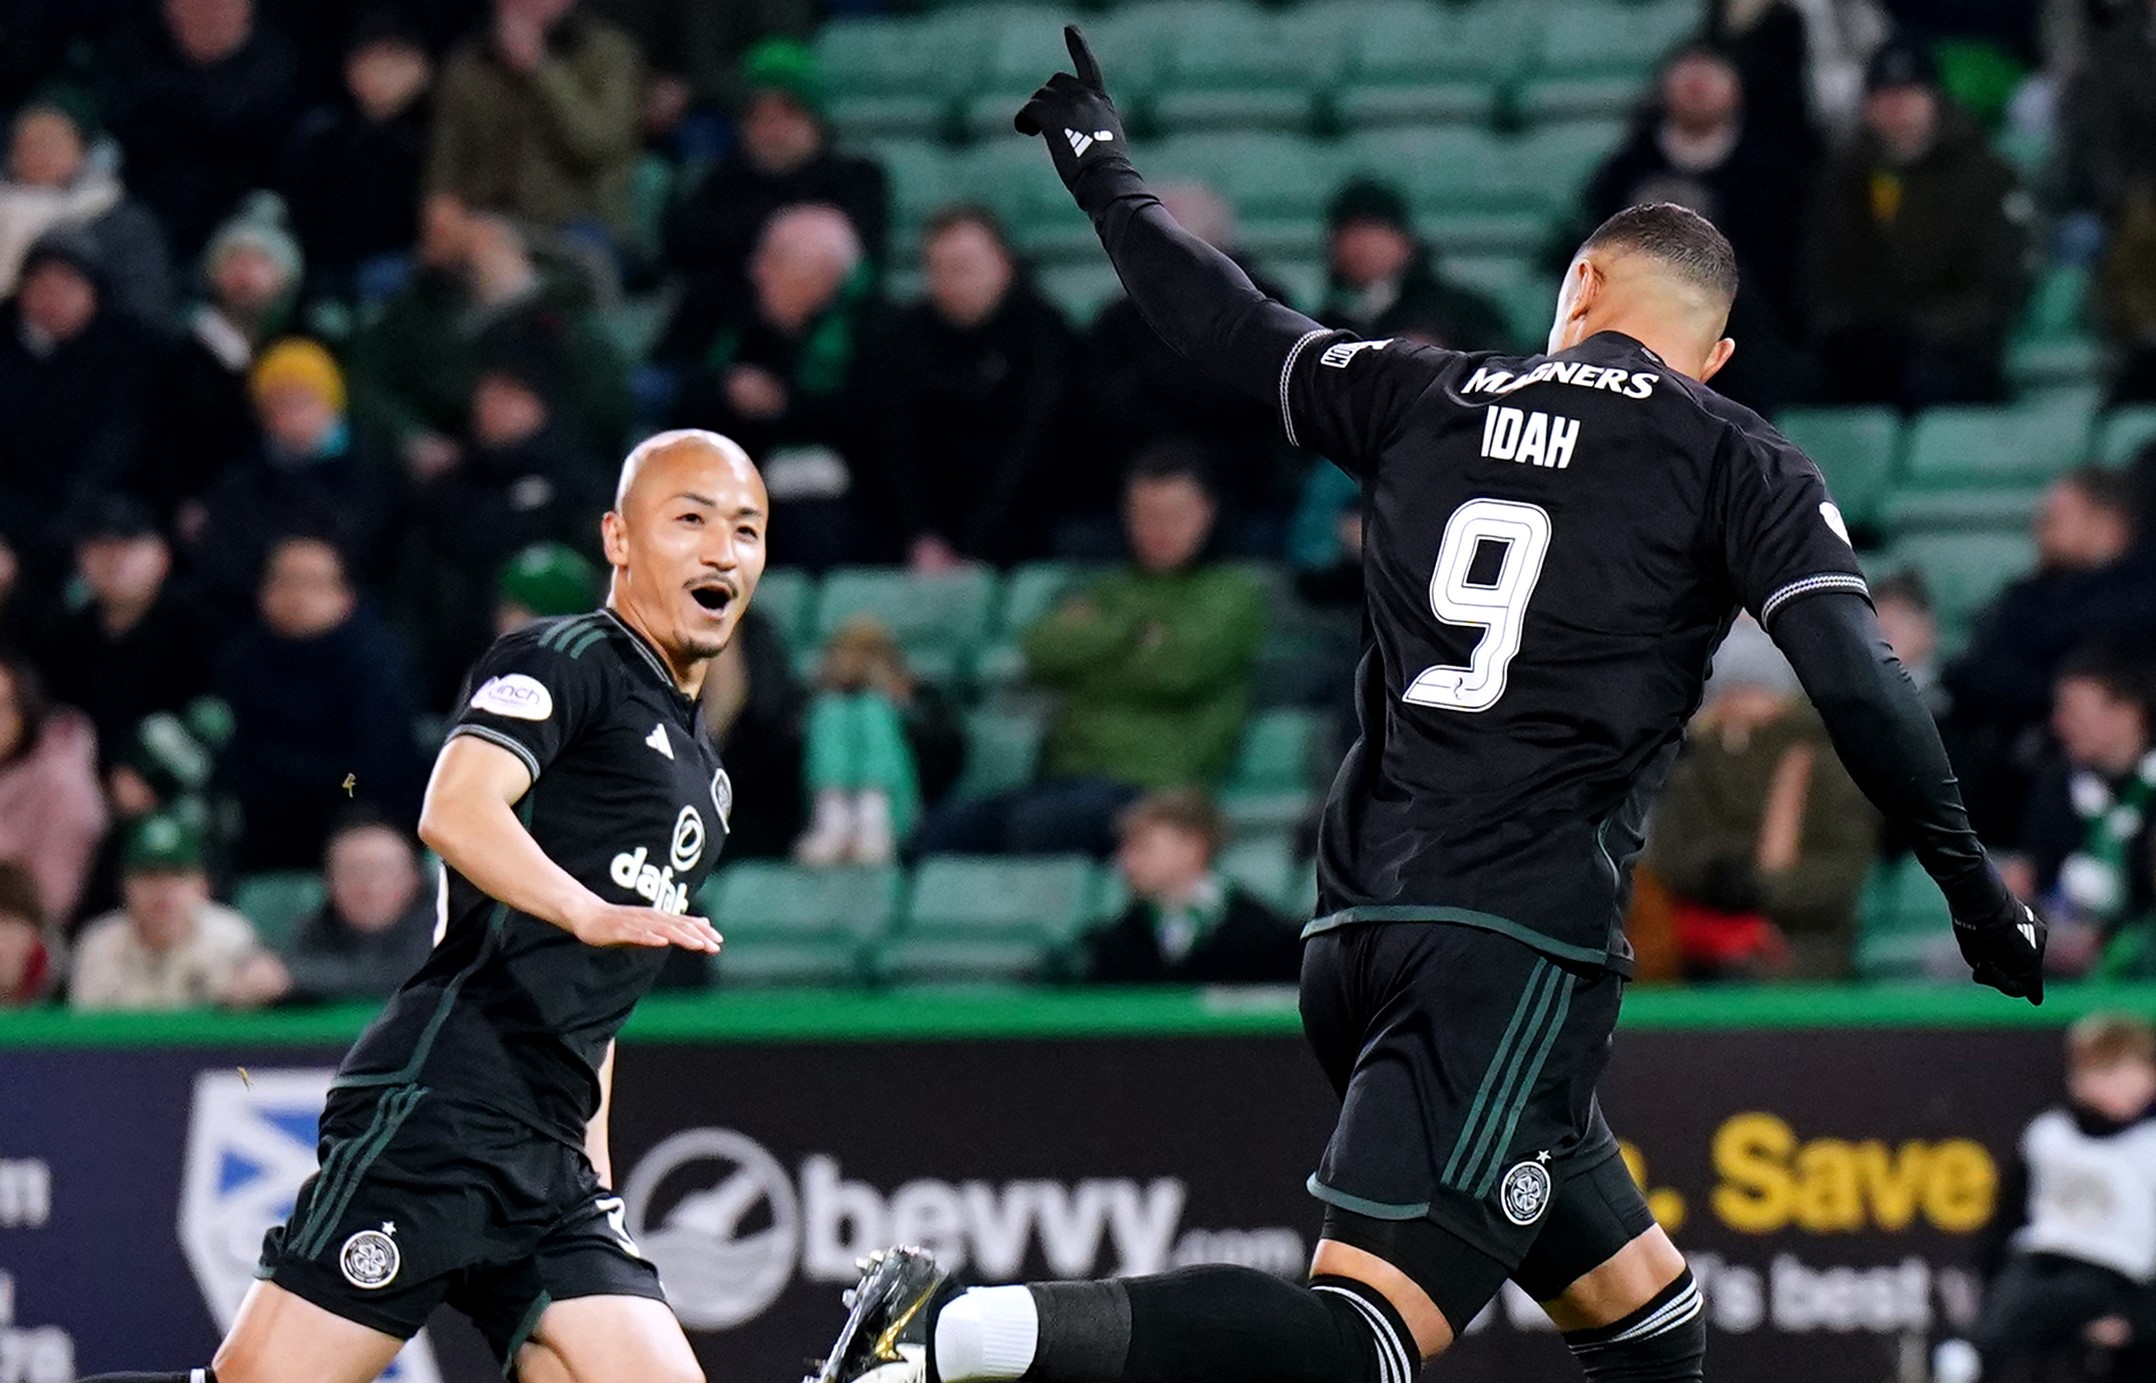 Hibs 1 Celtic 2: Instant reaction to the burning issues